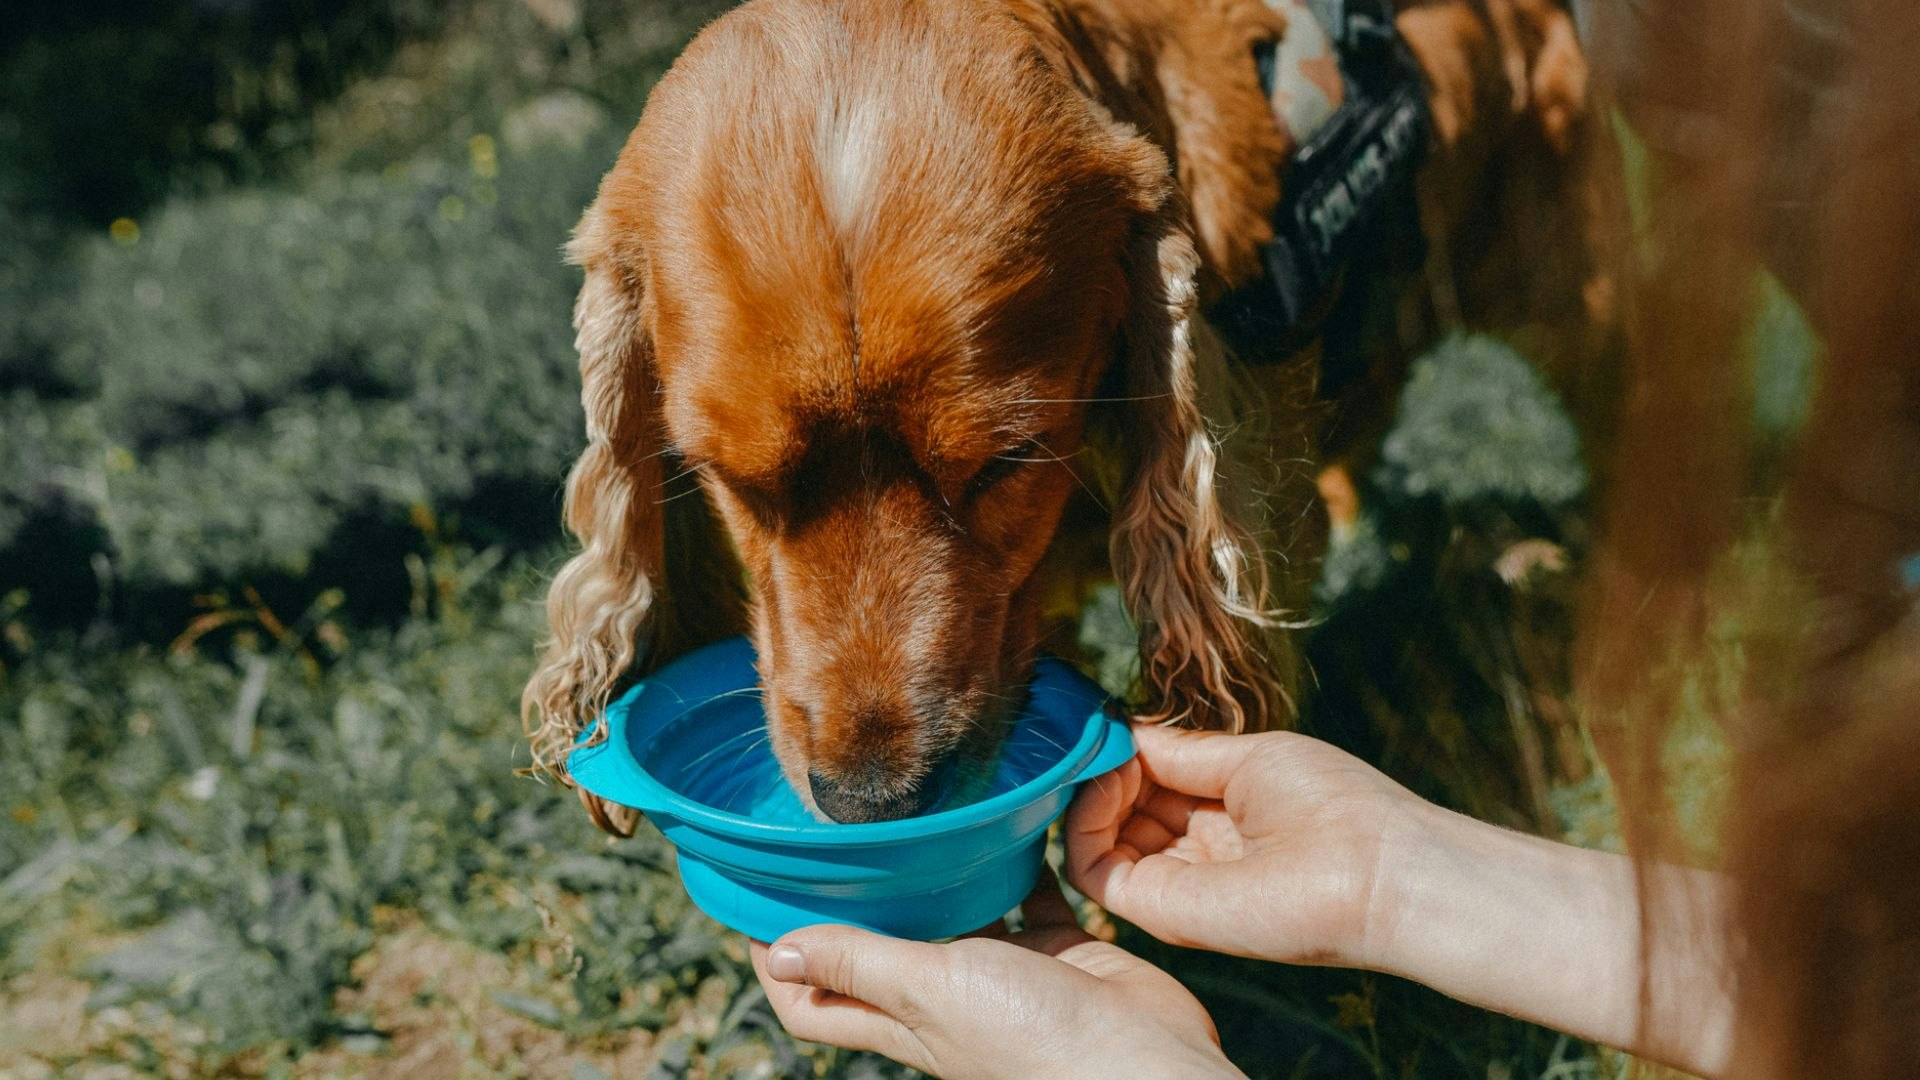 https://images.bauerhosting.com/marketing/sites/22/2022/12/The-best-dog-travel-water-bowls-and-bottles.jpg?ar=16%3A9&fit=crop&crop=top&auto=format&w=undefined&q=80